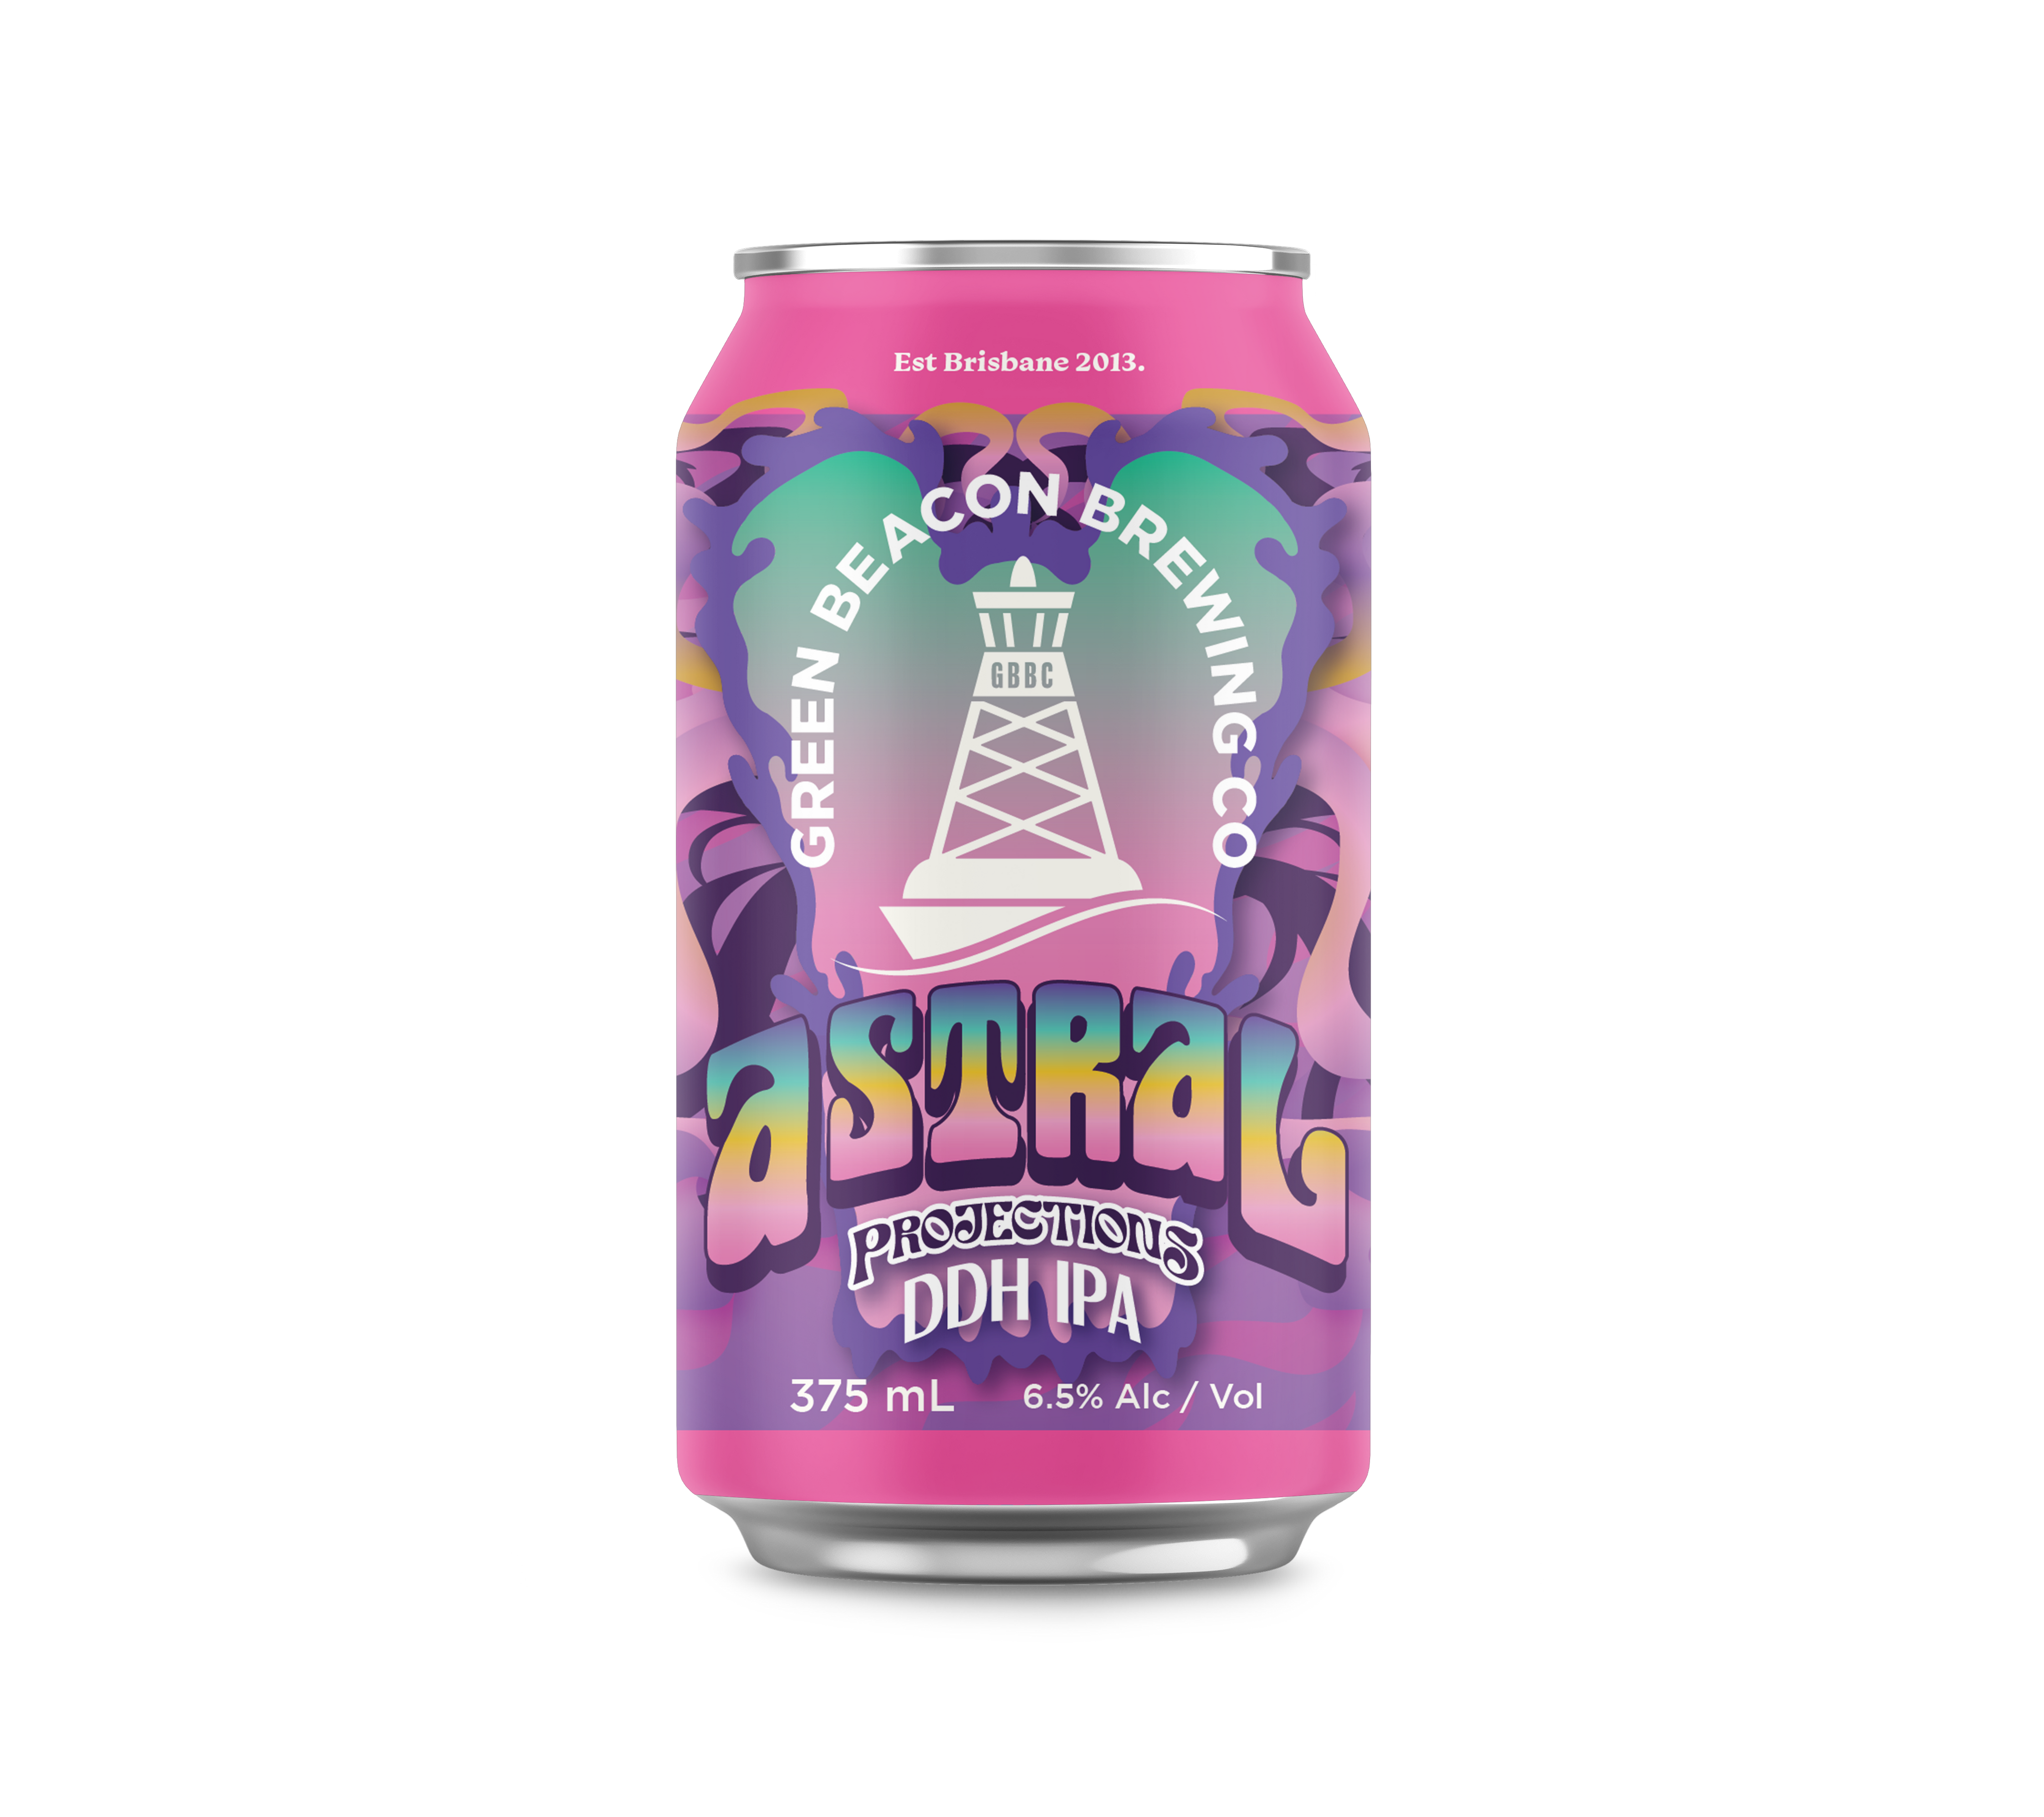 Astral Projections DDH IPA